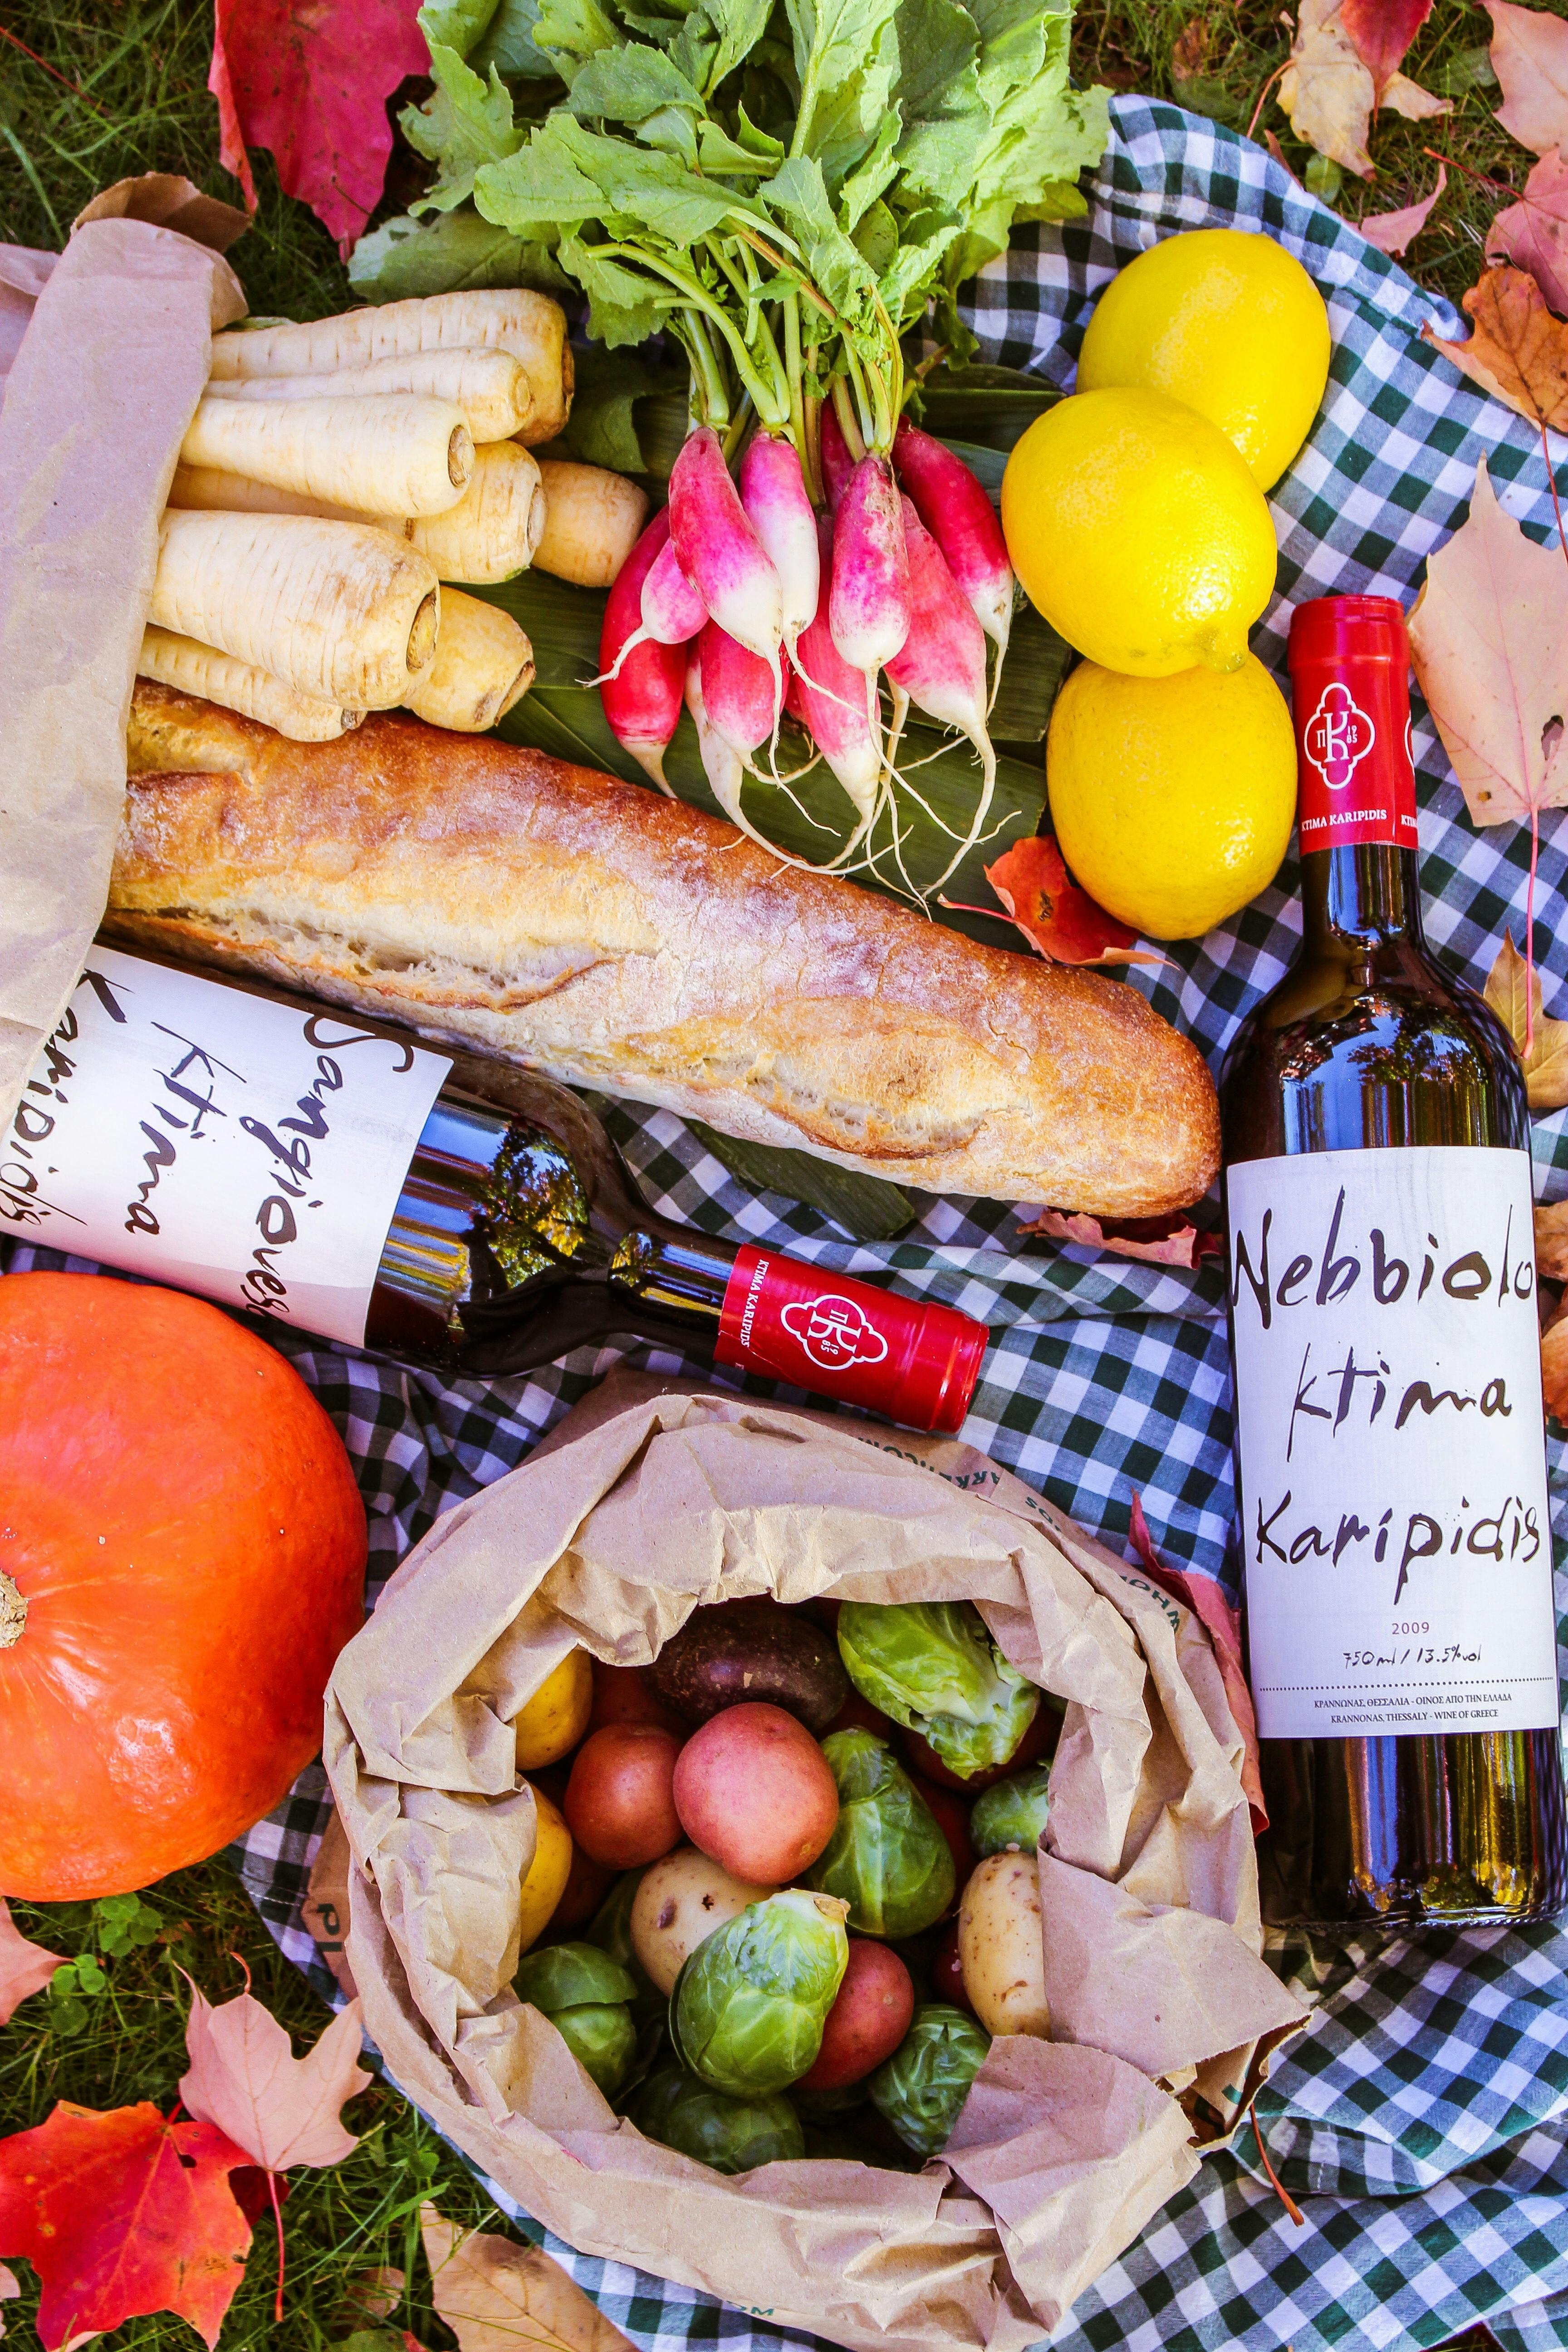 Fruit, vegetables, bread and wine laid out on a picnic blanket